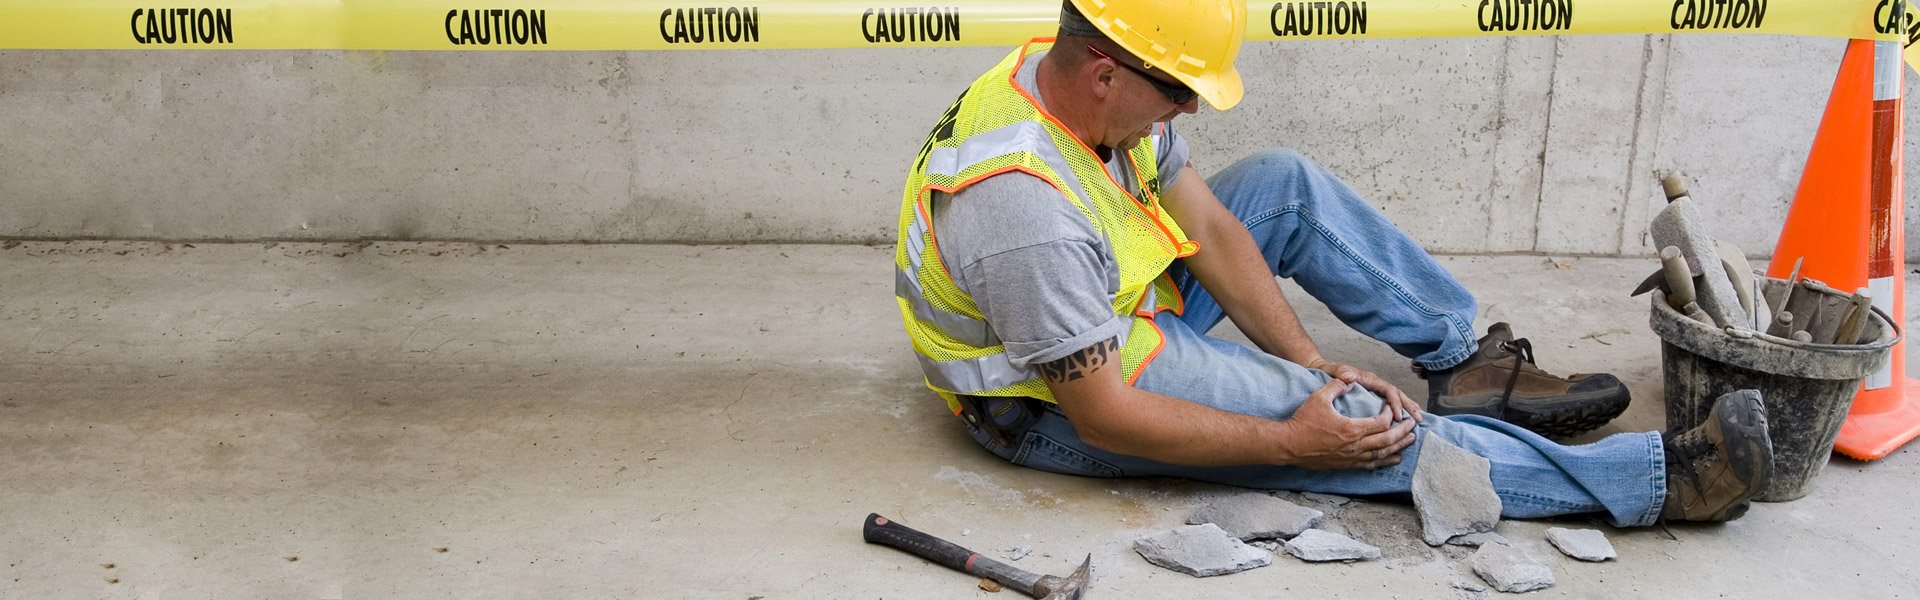 Workplace Safety Recap: The 10 Most Common Workplace Injuries